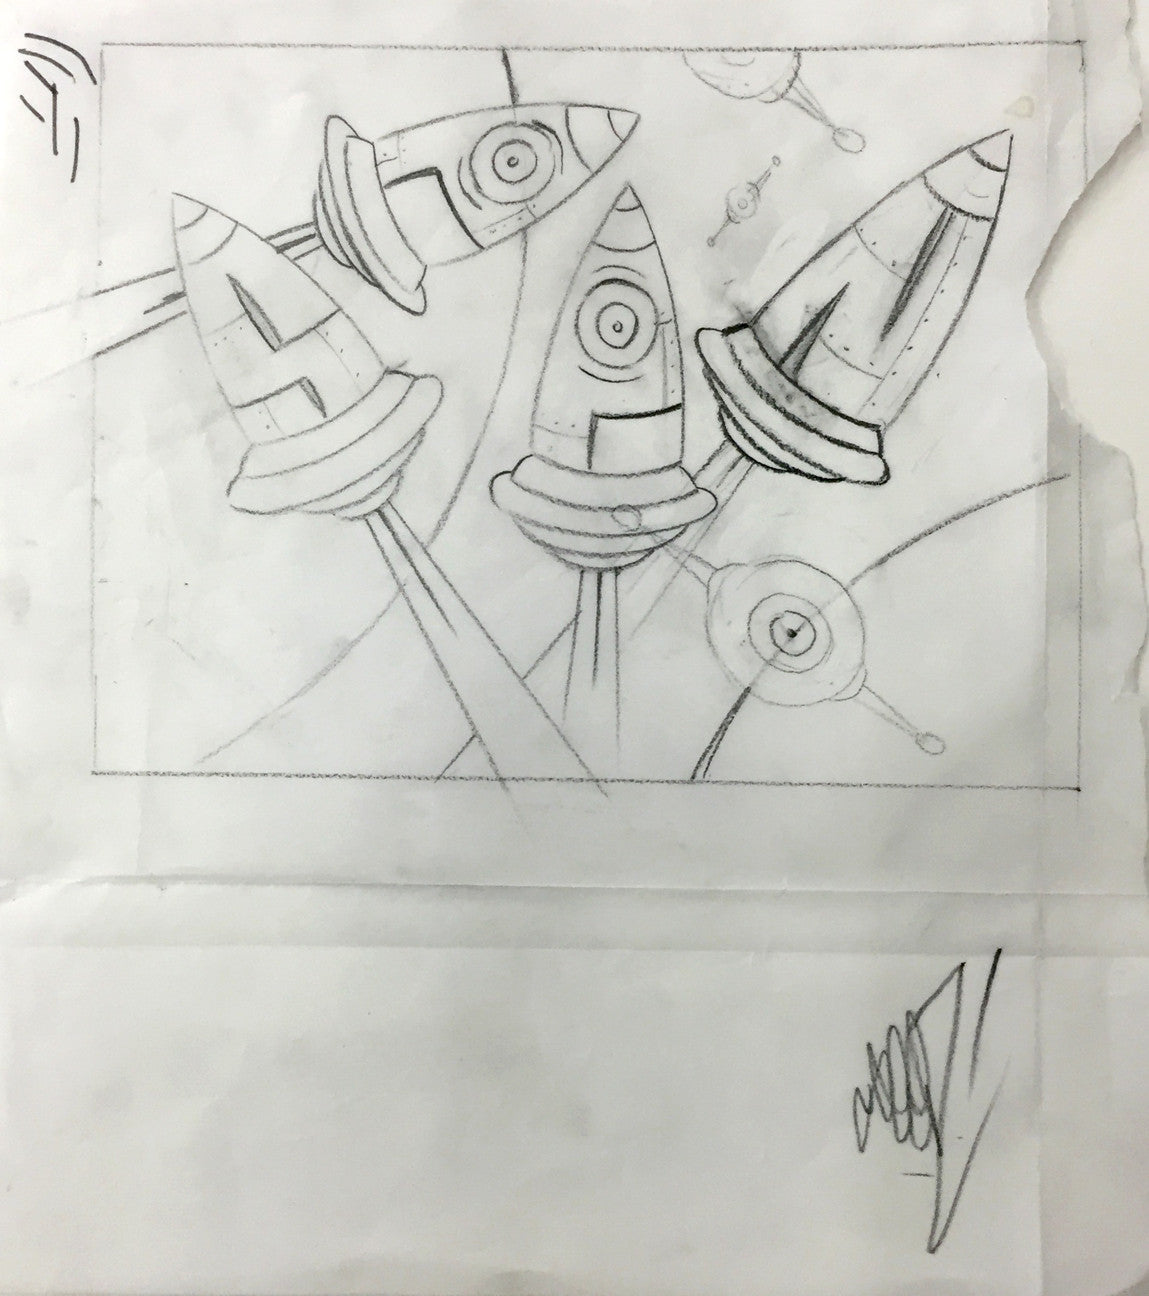 SEEN - "Space Station" Study